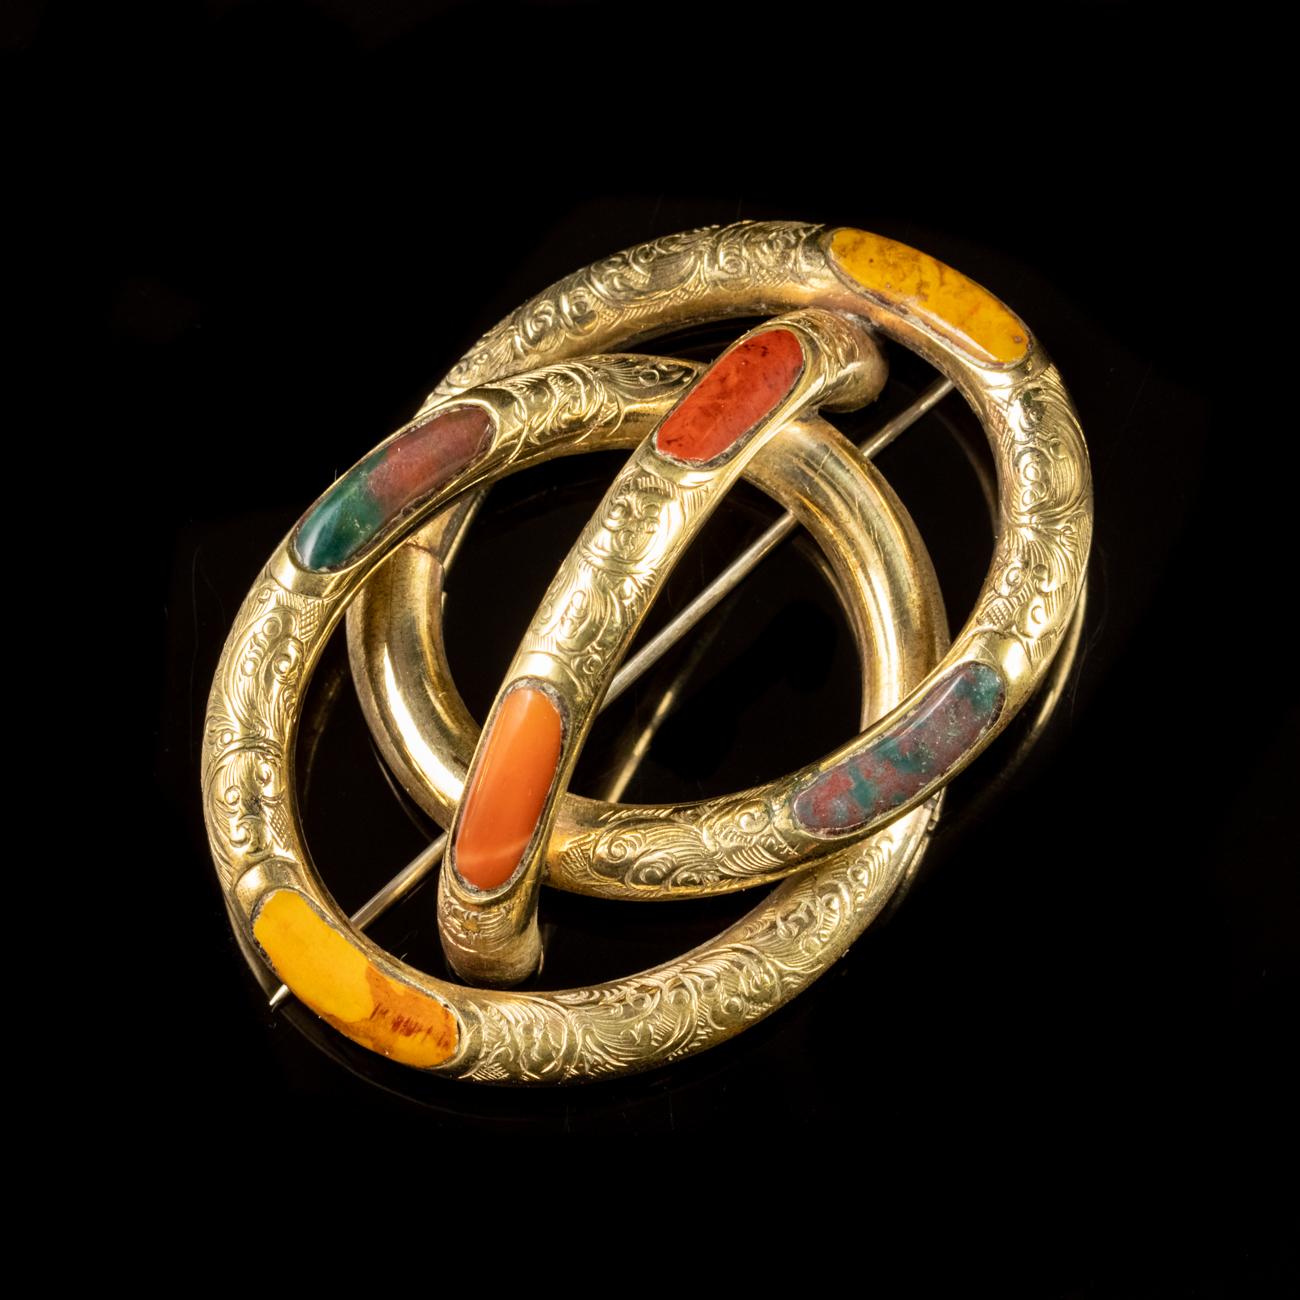 This beautiful Antique Victorian brooch has been commissioned in Pinchbeck gilded in Yellow Gold to form the shape of a knot, known as a Lover’s Knot. The brooch is further adorned with six pieces of beautiful Scottish Agate and engraved with